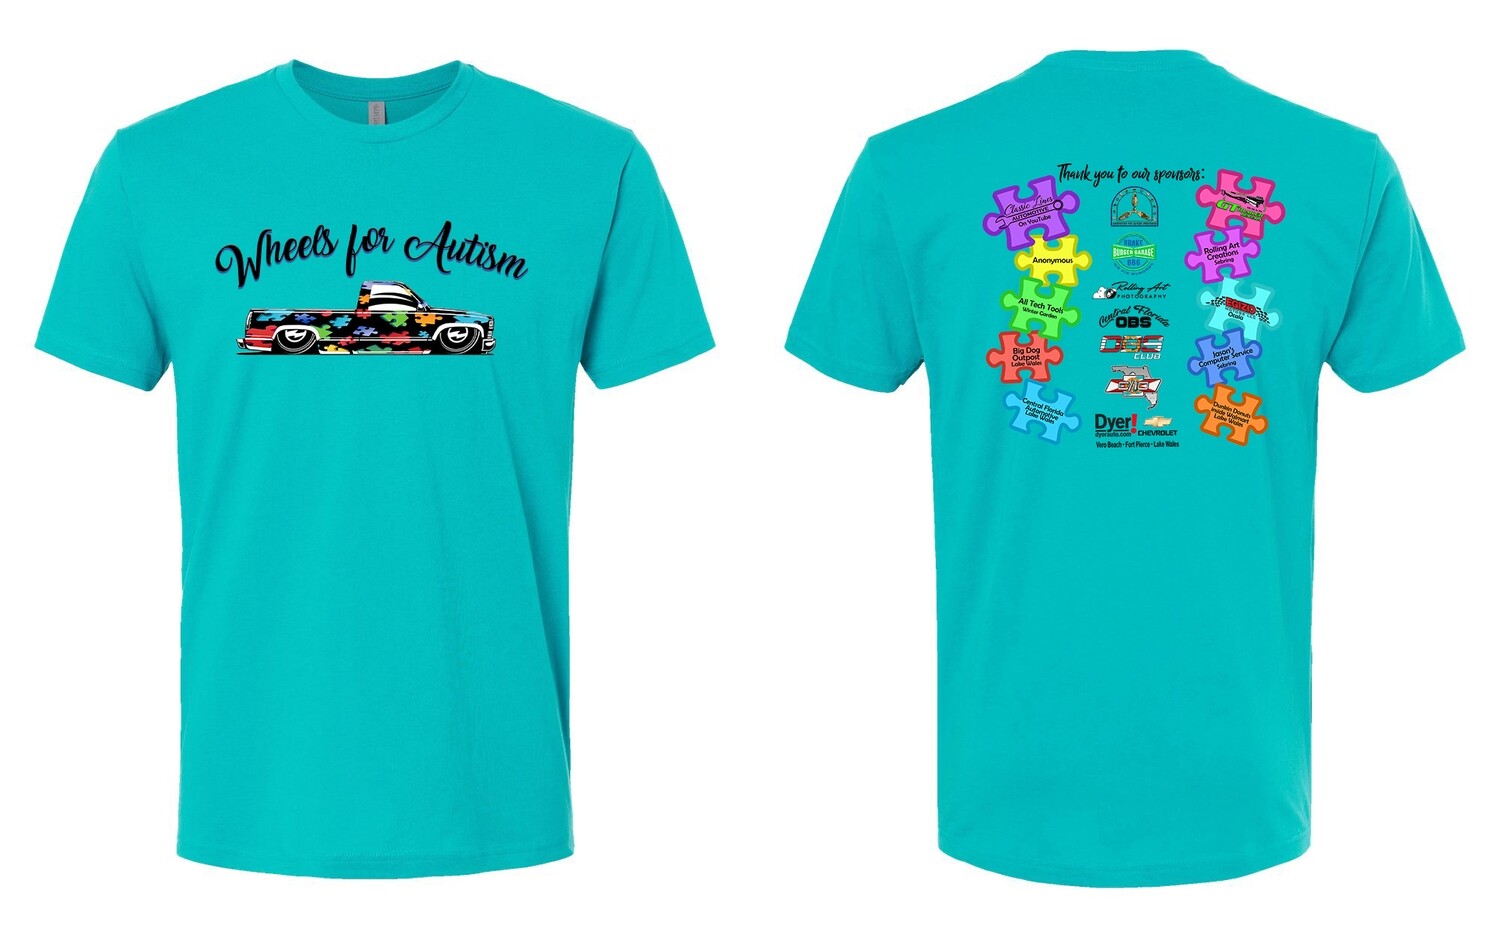 Wheels for Autism t-shirt